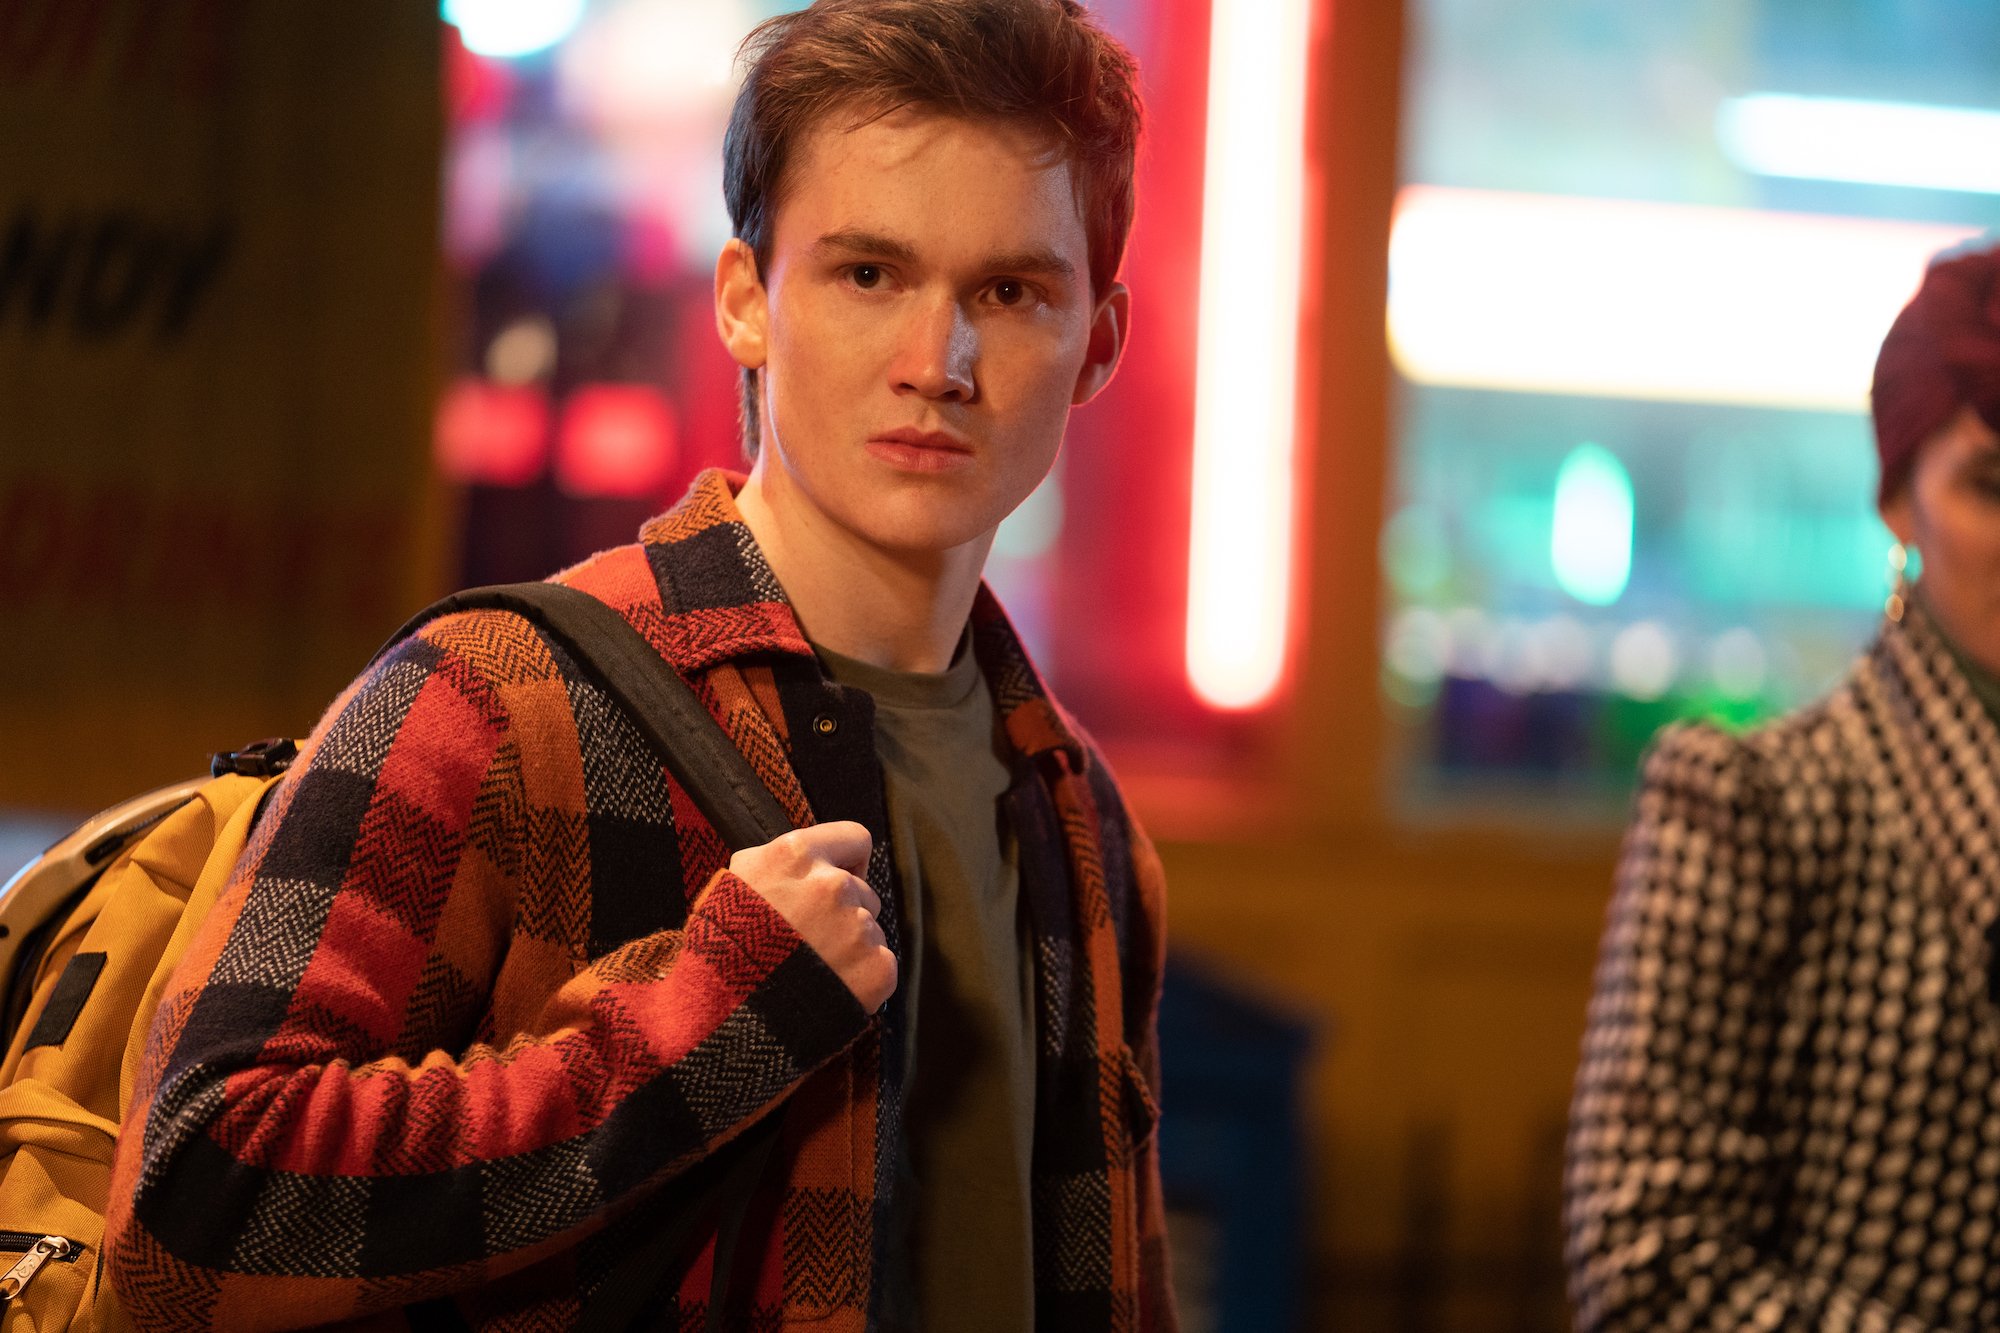 Matt Lintz, in character as Bruno in 'Ms. Marvel' on Disney+, wears a red and black plaid button-up shirt over a gray t-shirt.